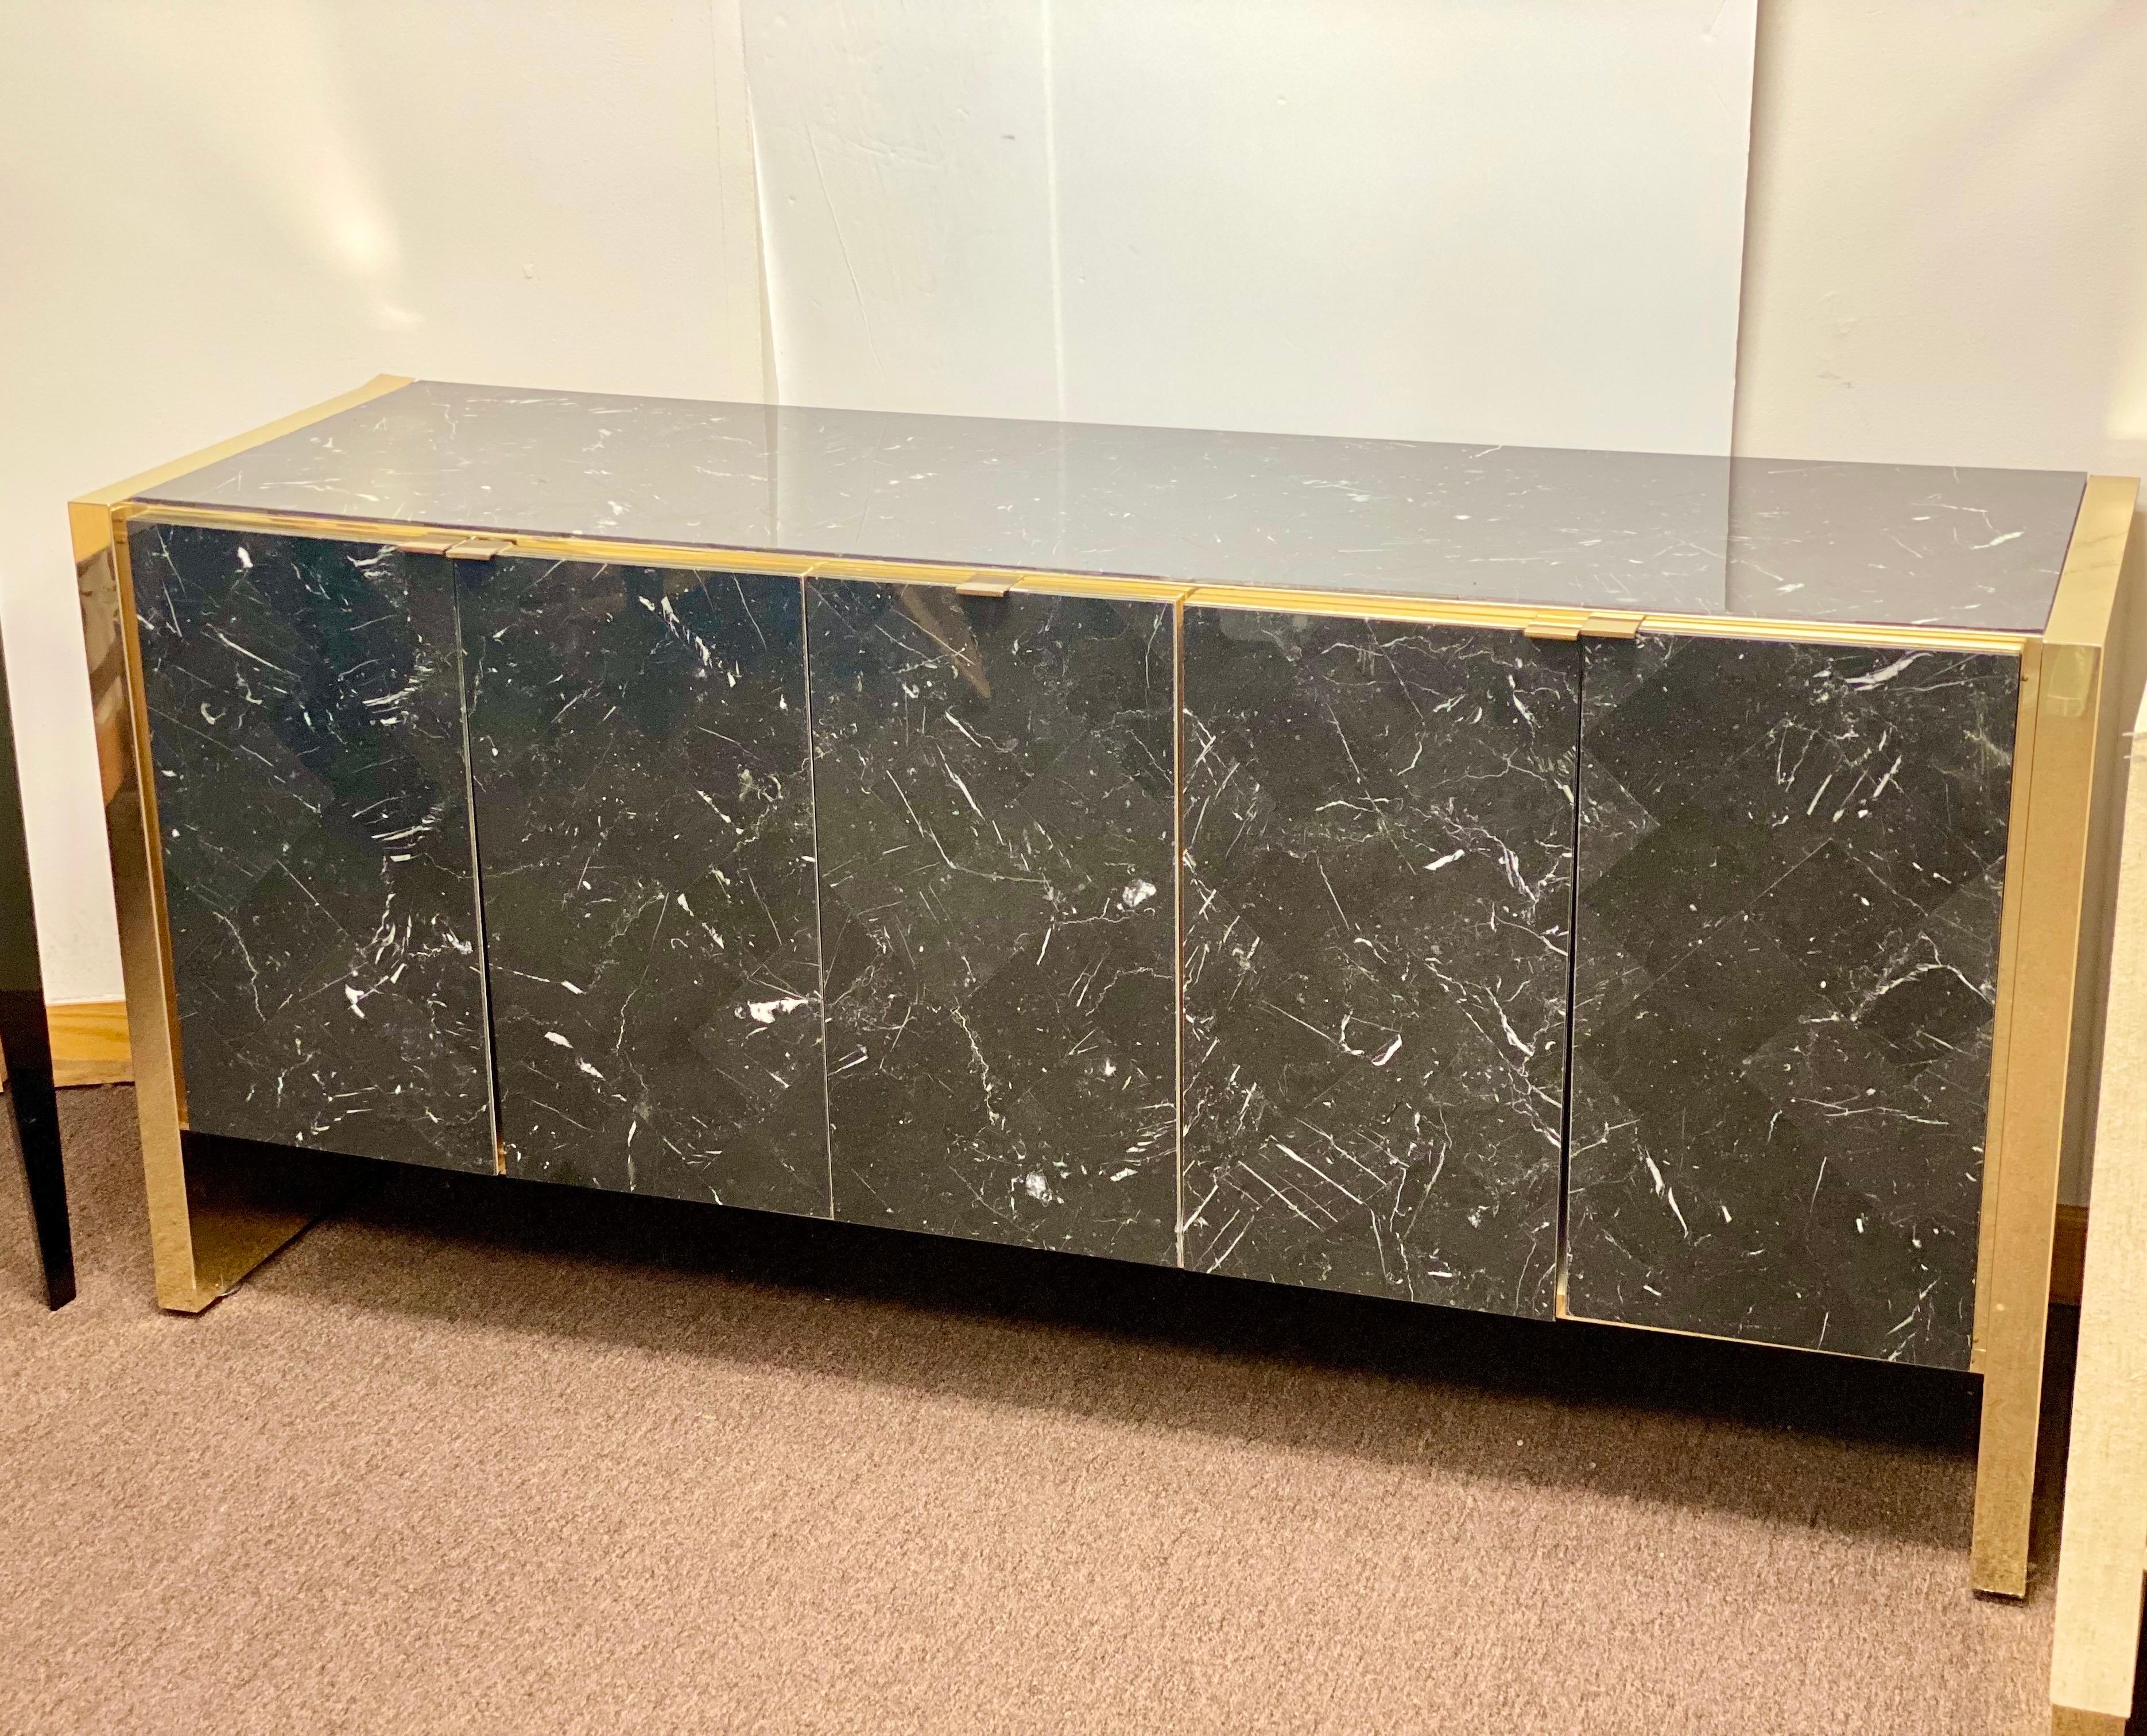 We are very pleased to offer a stunning, chic credenza by Ello Furniture, circa the 1980s. Ello Furniture was founded in 1955 in Chicago, IL, their motto “Contemporary Furniture meets Function with Spectacular Glamour”; this credenza is no